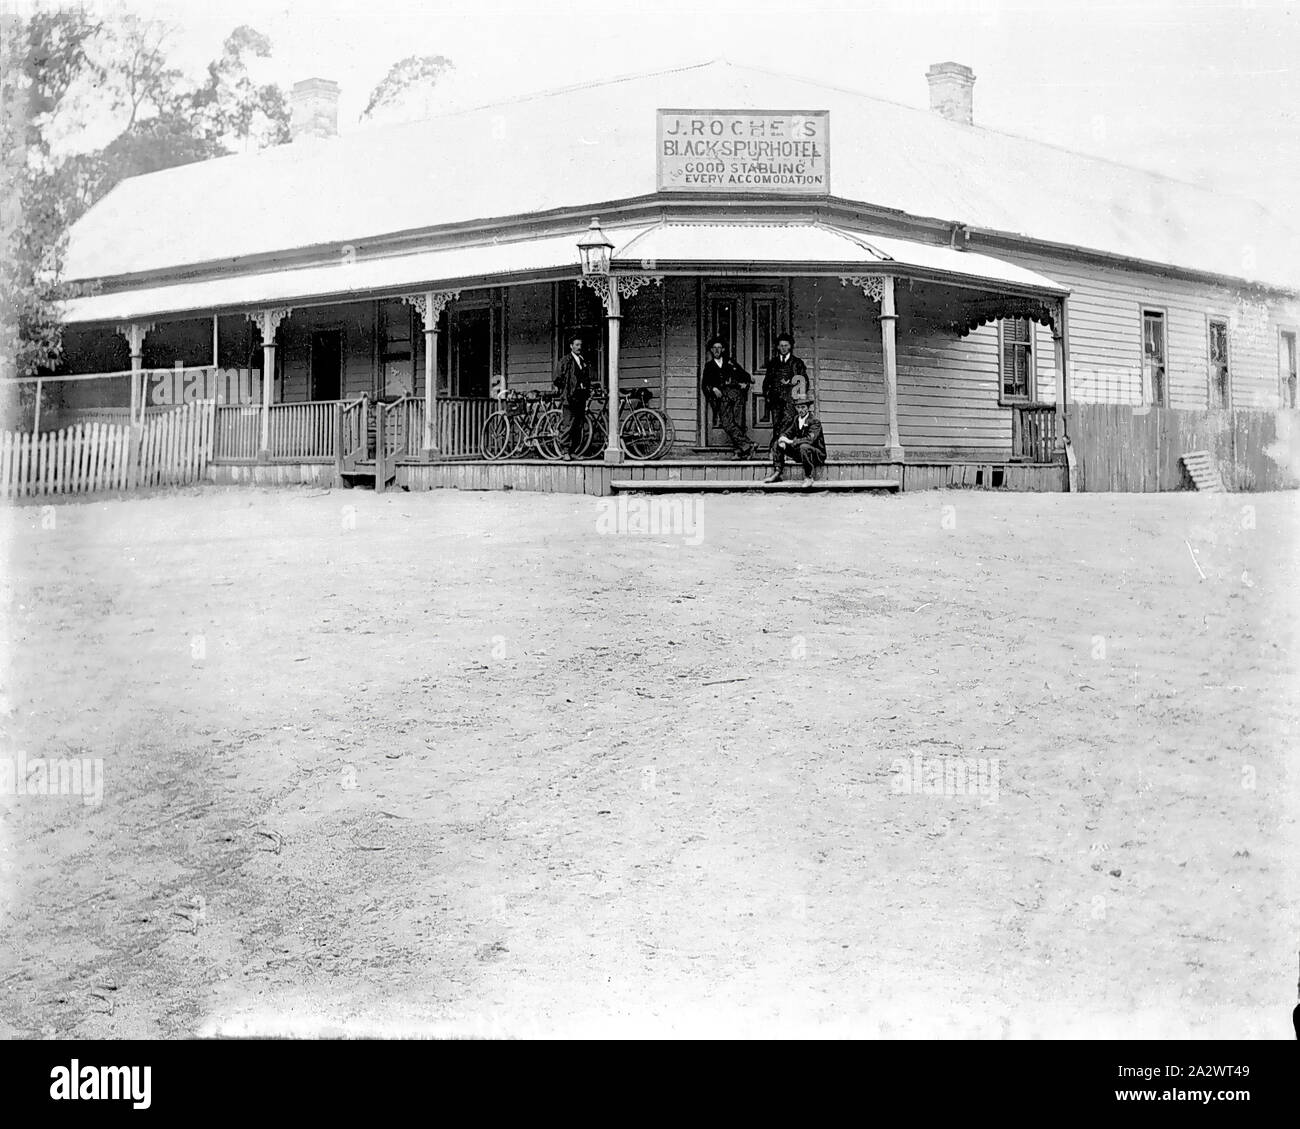 Negative - Black Spur Hotel, Victoria, circa 1905, Group of men on the verandah of J. Roche's Black Spur Hotel. The hotel advertises good stabling and every accommodation Stock Photo